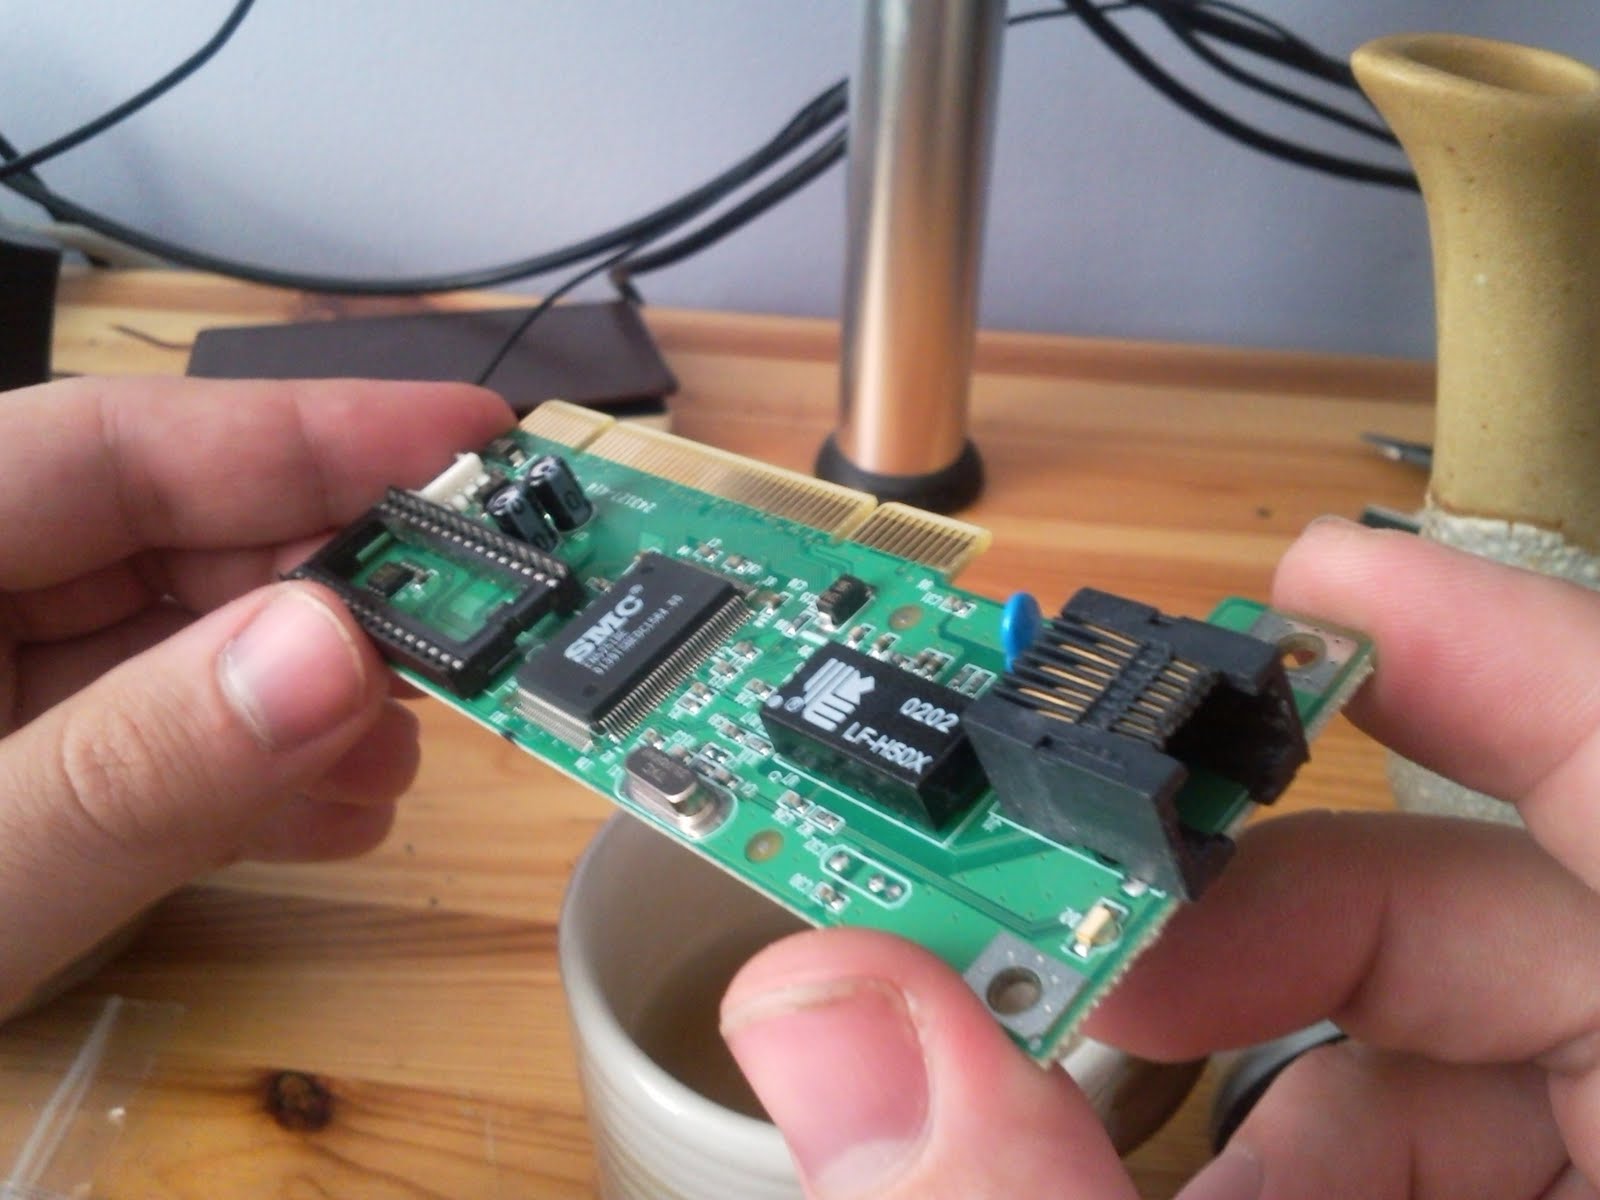 Removing the cover plate of the network card